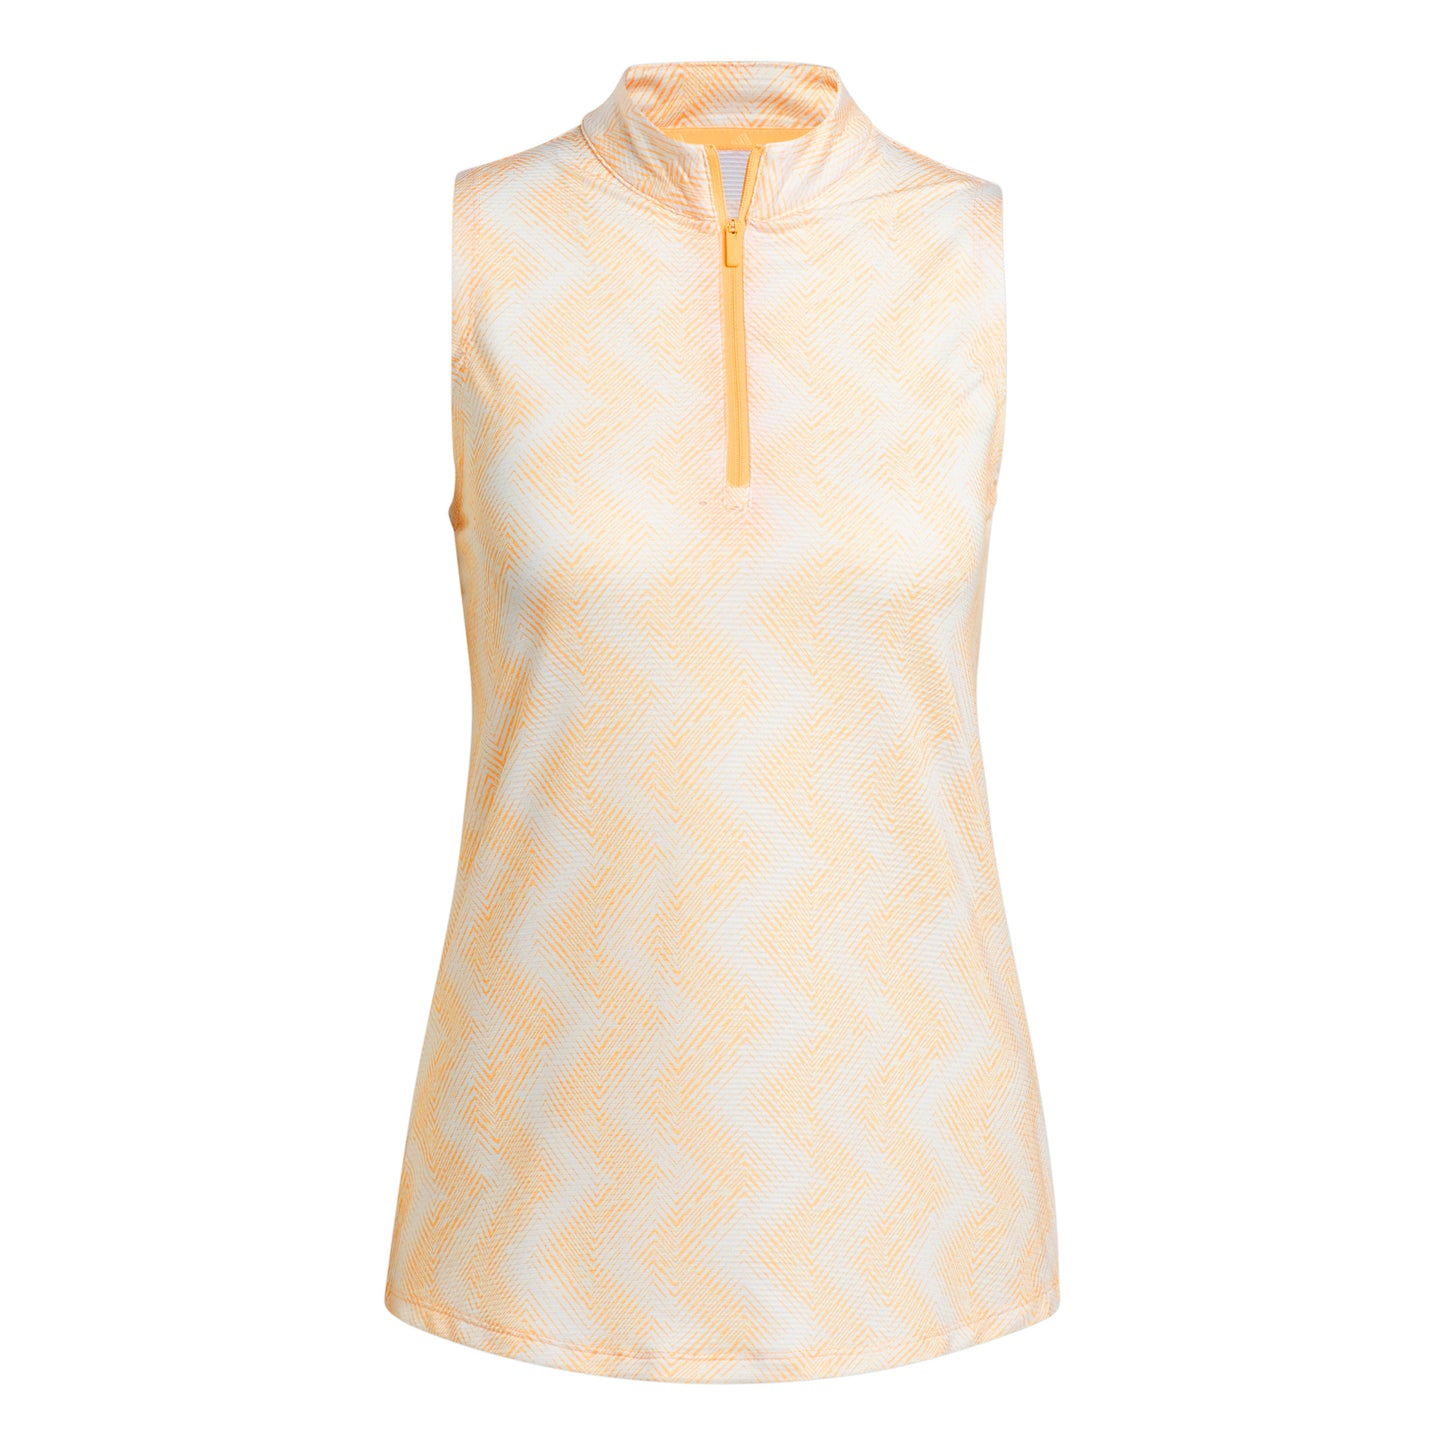 adidas Ladies Sleeveless Golf Polo with Abstract Zig-Zag Print in Semi Spark